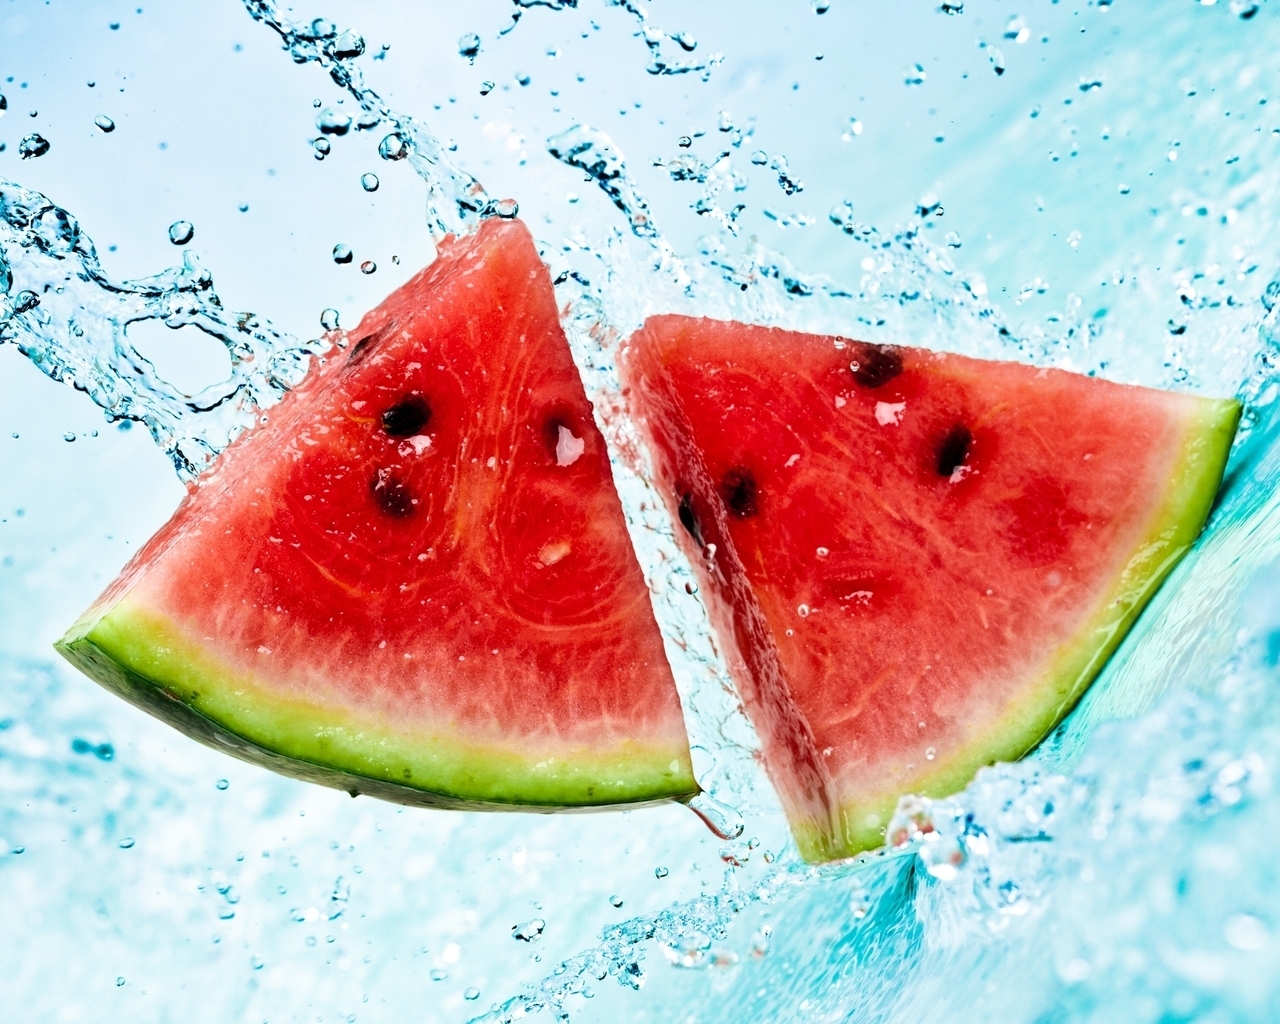 Watermelon Slices for 1280 x 1024 resolution